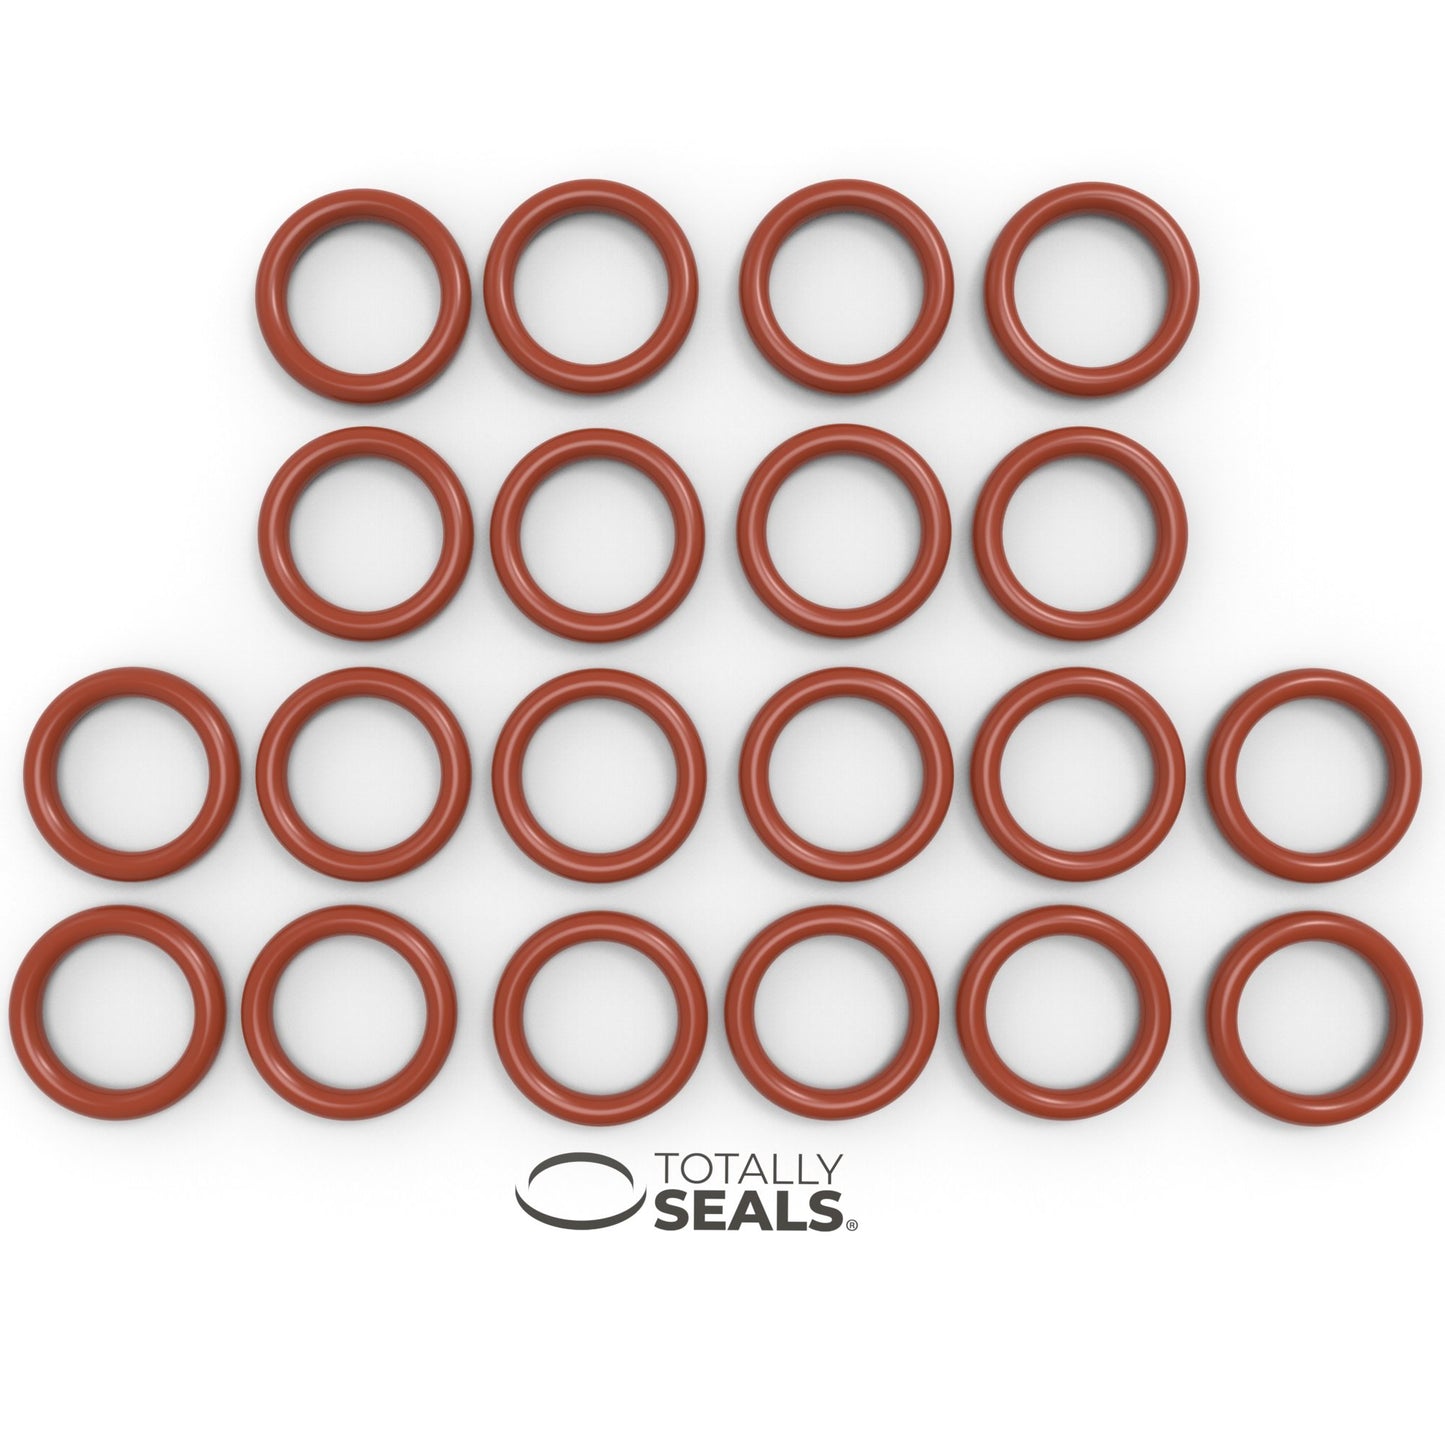 19mm x 2.5mm (24mm OD) Silicone O-Rings - Totally Seals®